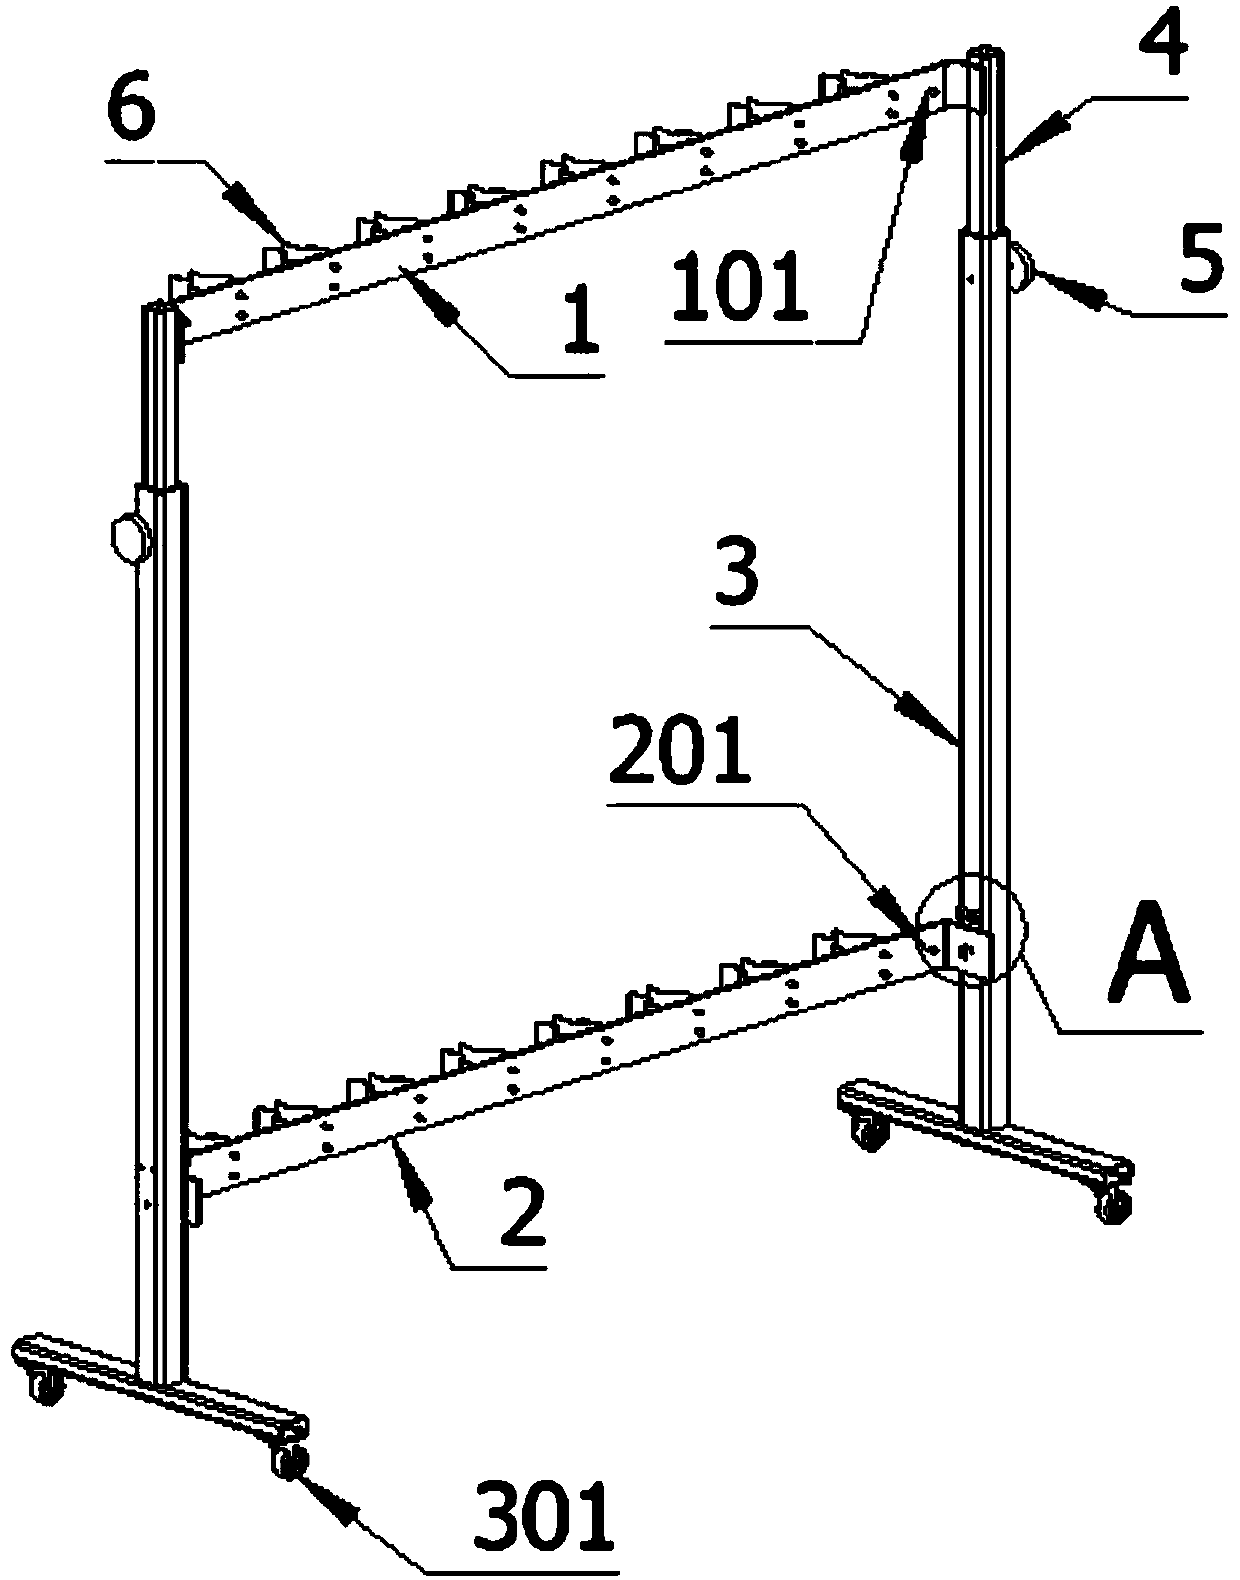 A detection frame for electric power operation and maintenance and maintenance tools